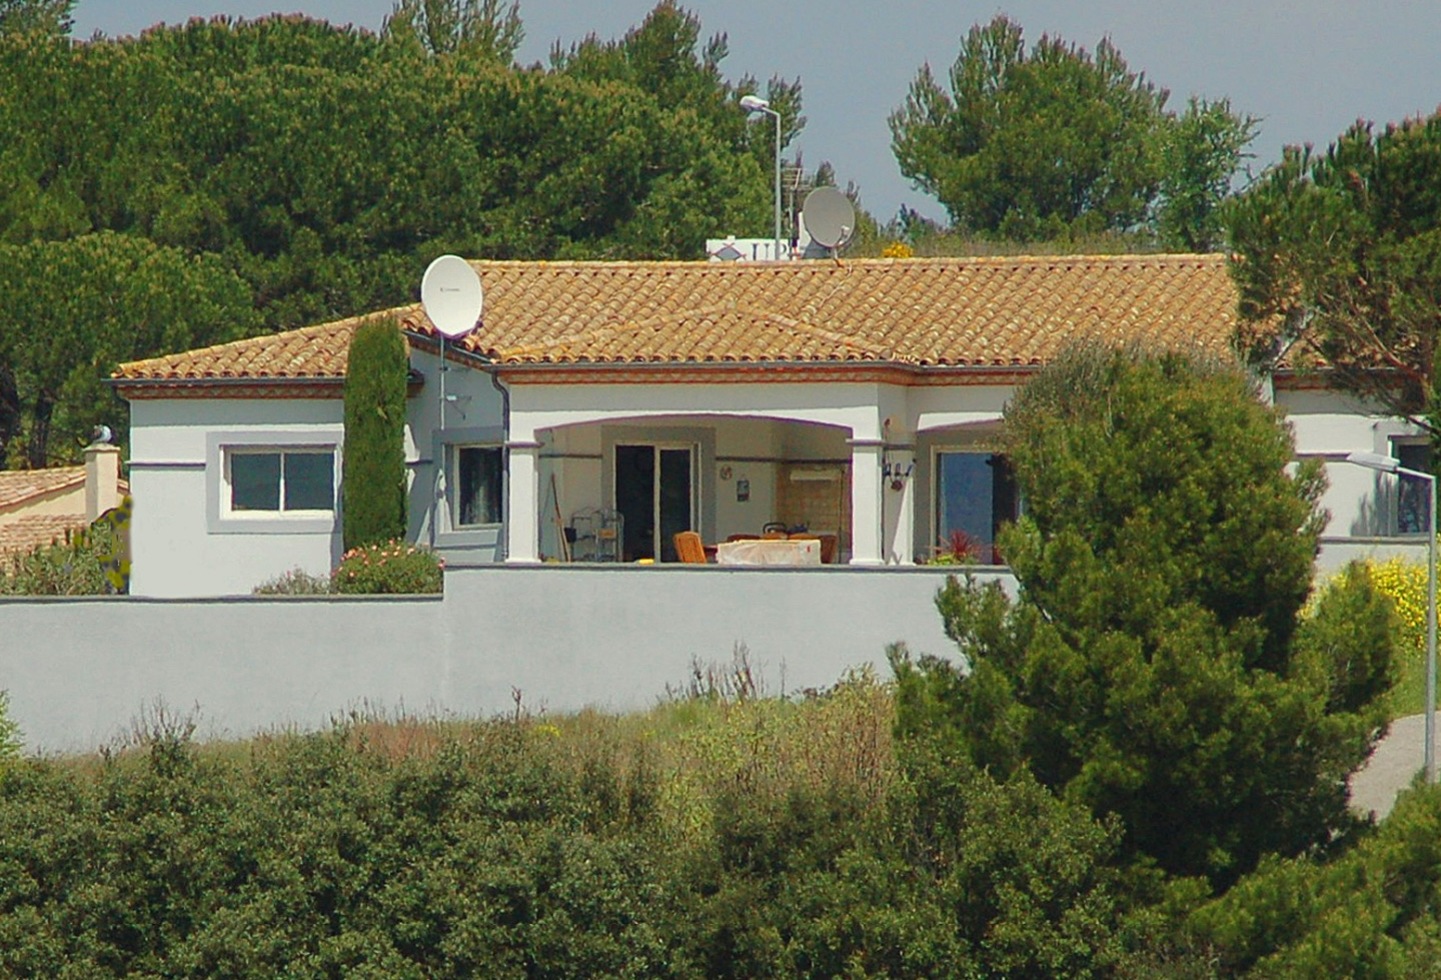 our villa from the buttom of the hill